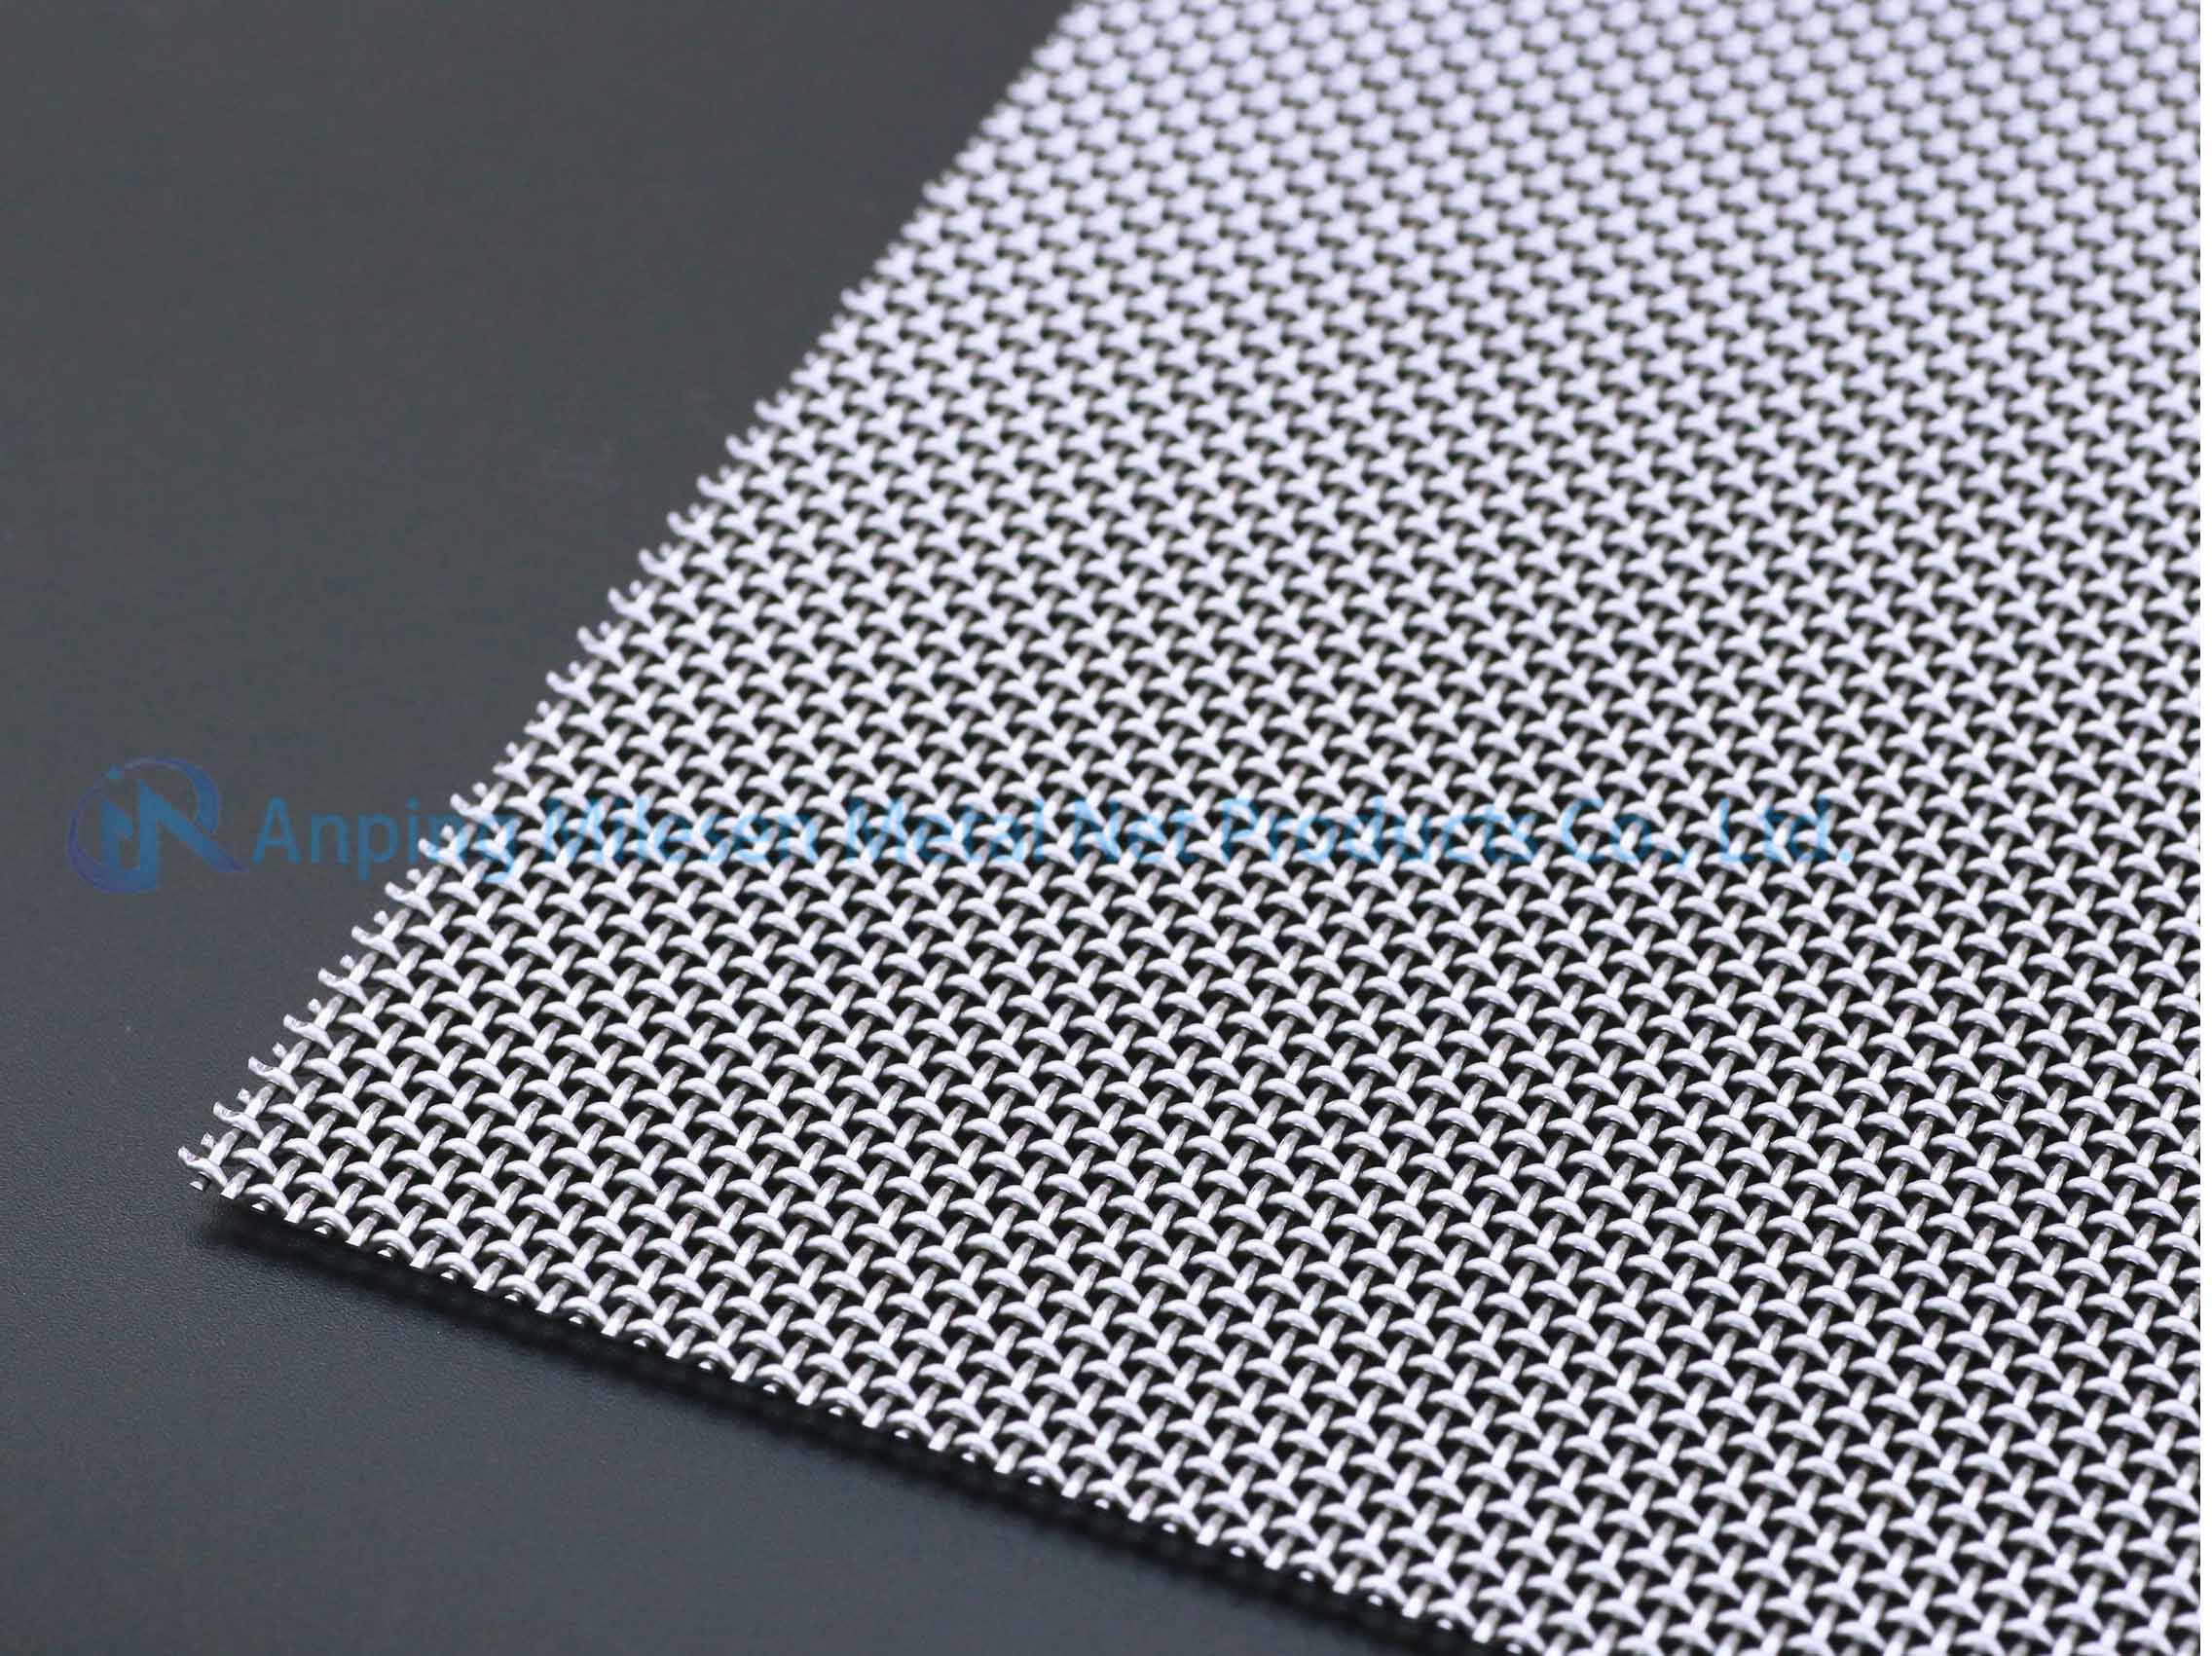 Stainless Steel Square Mesh